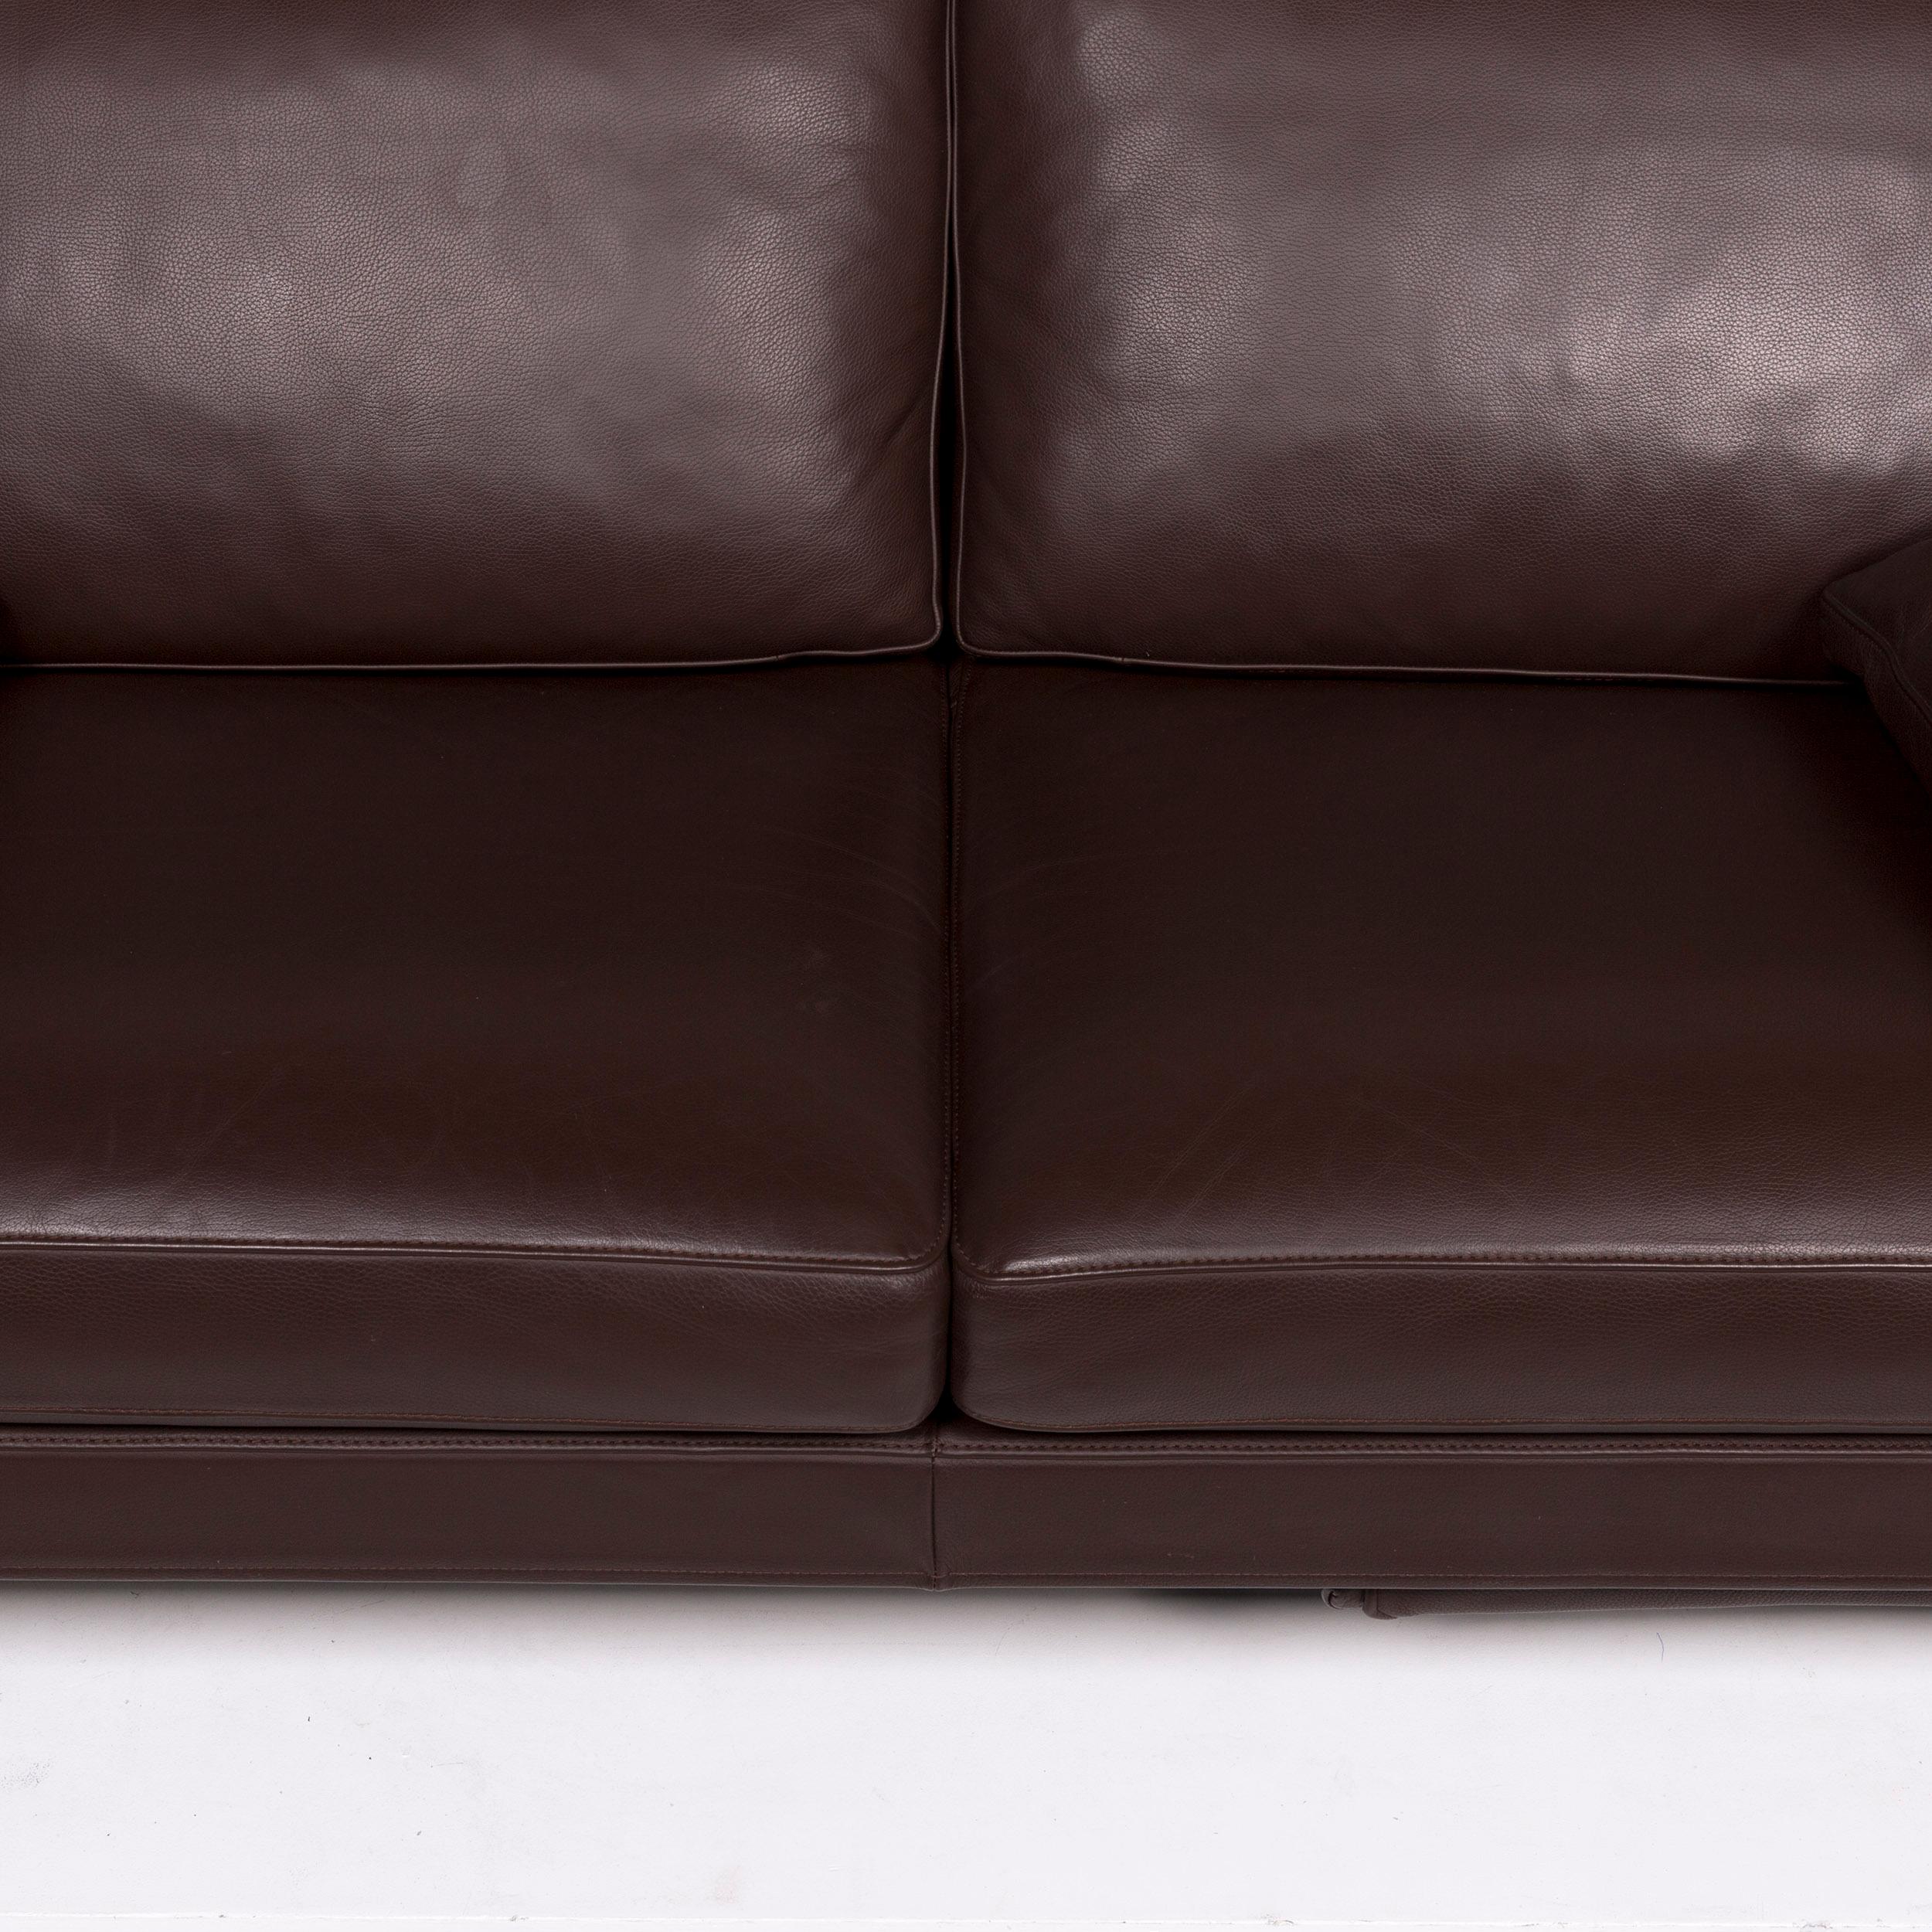 FSM Clarus Leather Sofa Set Brown Dark Brown 1 Three-Seat 1 Two-Seat In Good Condition For Sale In Cologne, DE